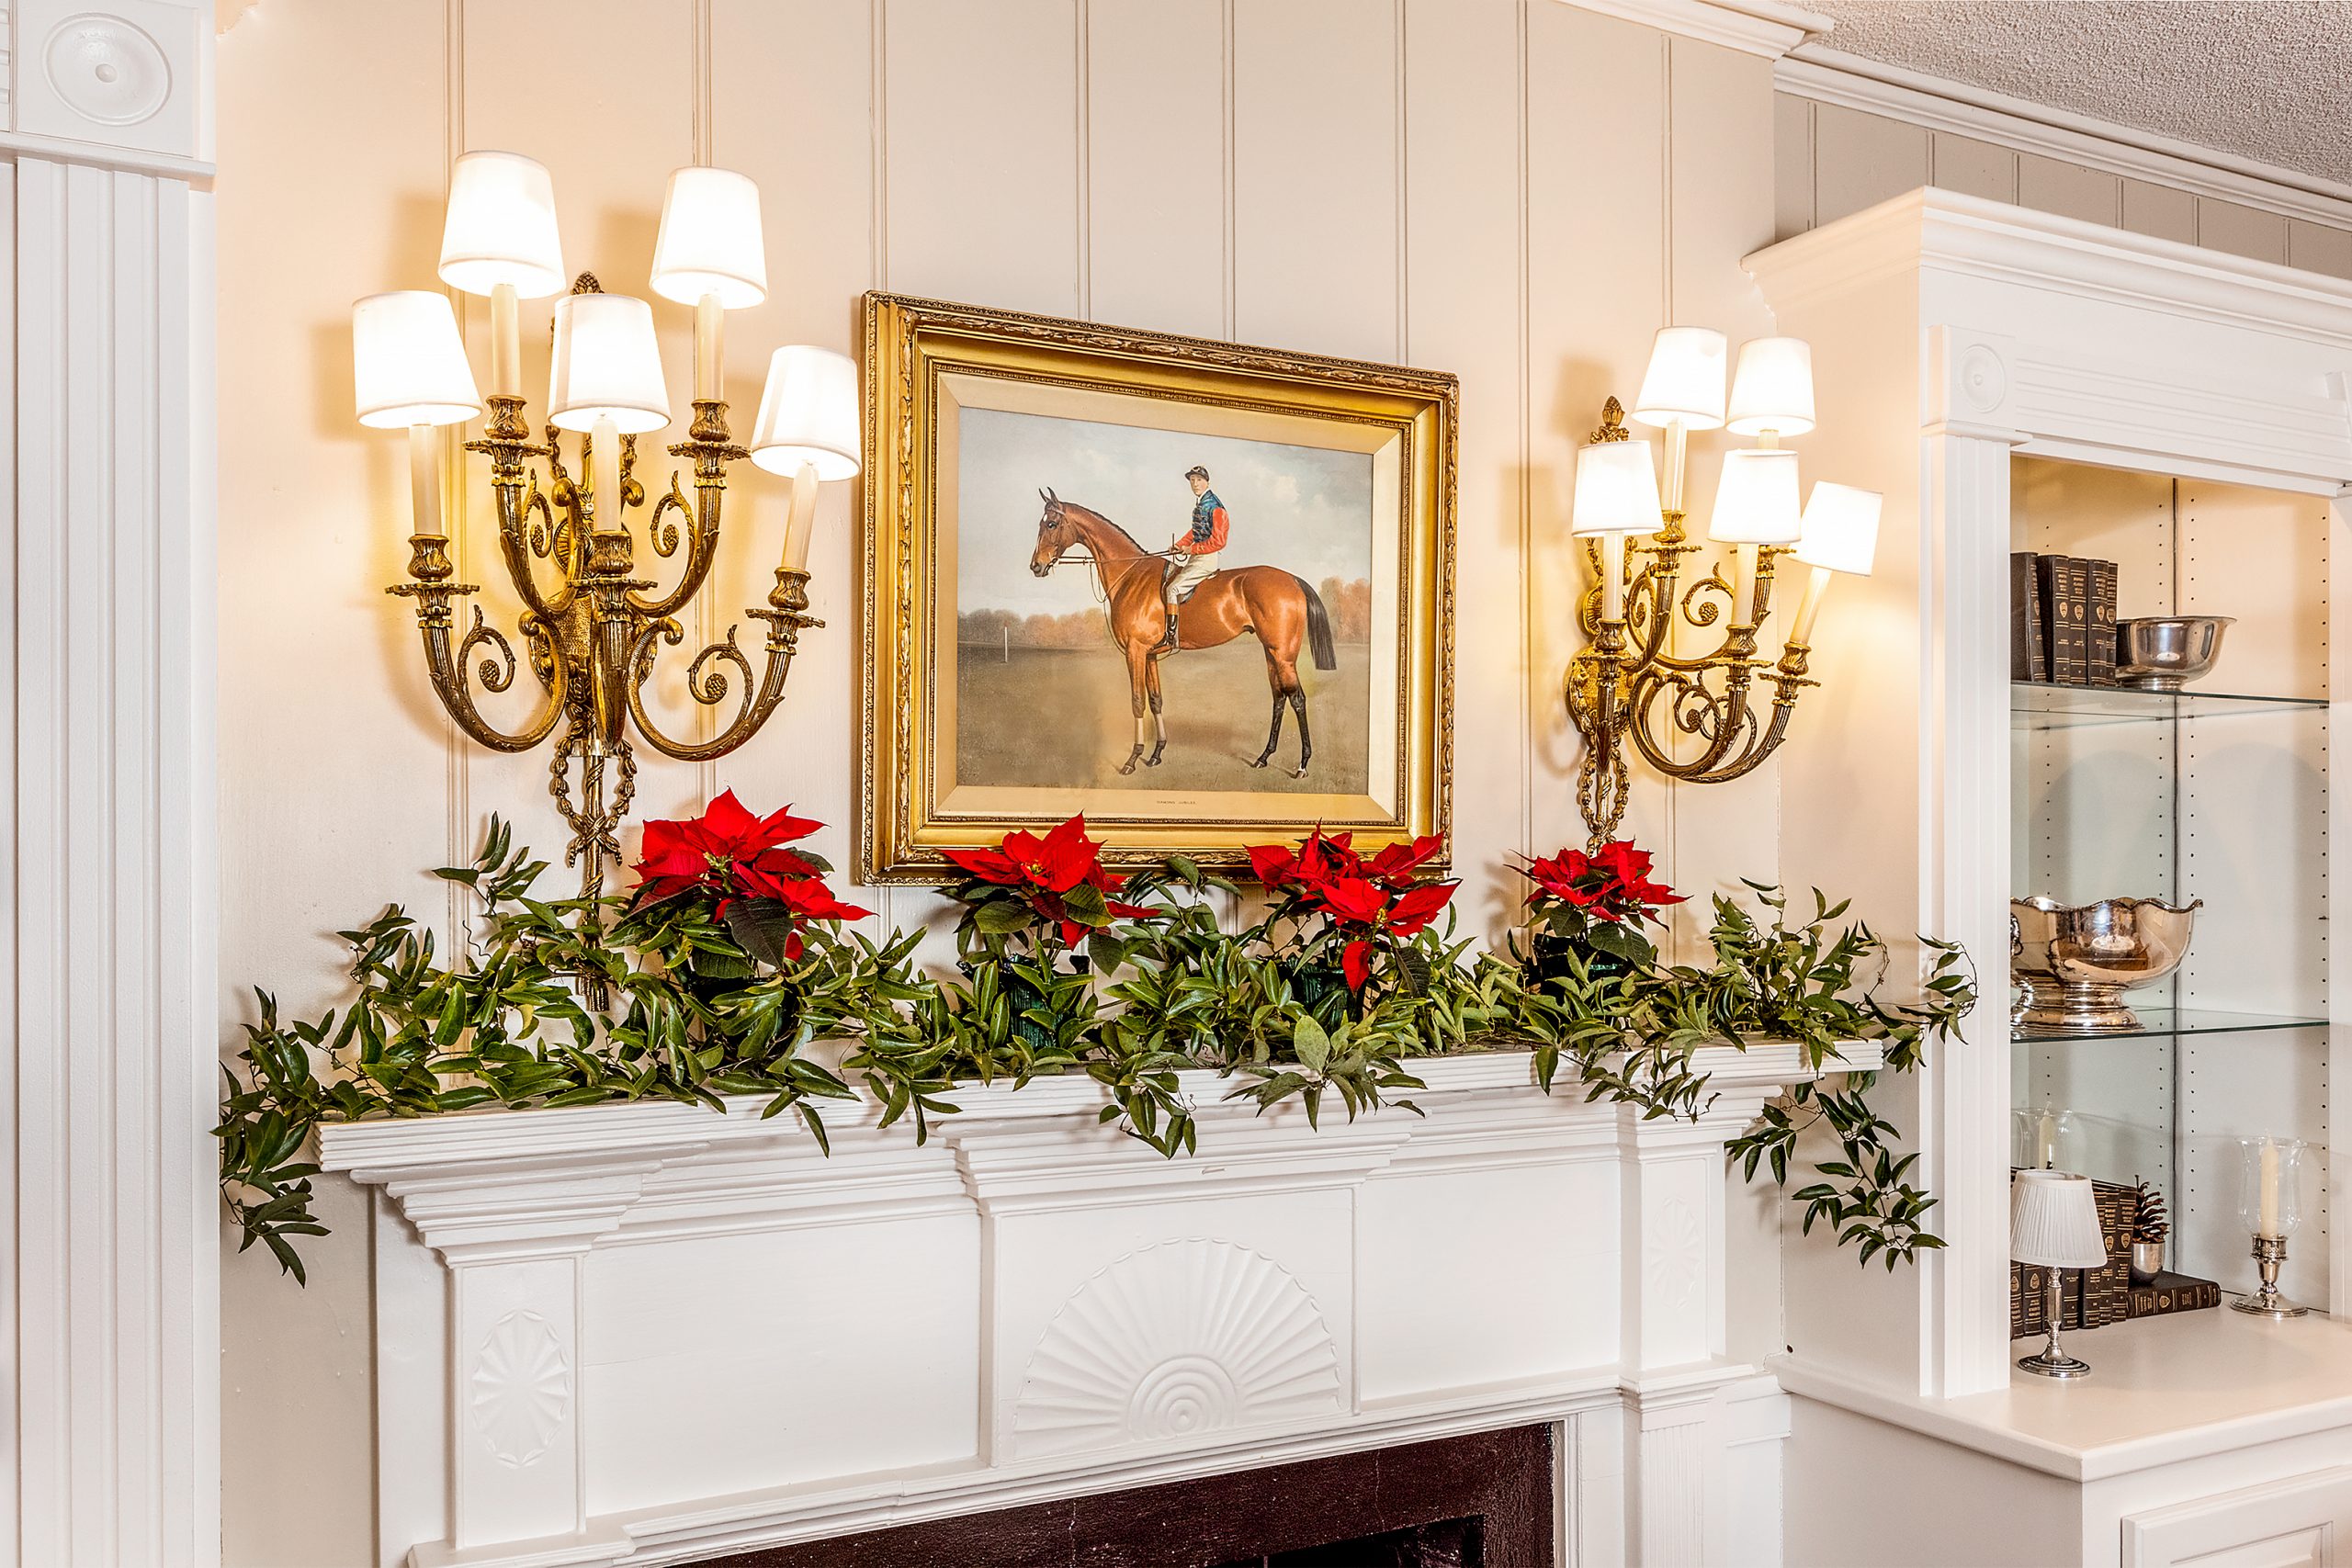 For more than a decade, Susan Shaw of Flowers Naturally has designed the floral displays and decorations that grace the interiors of Springdale Hall. Smilax and magnolia branches are a holiday favorite, adding sophistication and beauty to mantels, stair rails, and displays. The clubhouse’s authentic and traditional entrance is always dressed with fresh, natural greenery to create old-fashioned charm during the Christmas season. 
